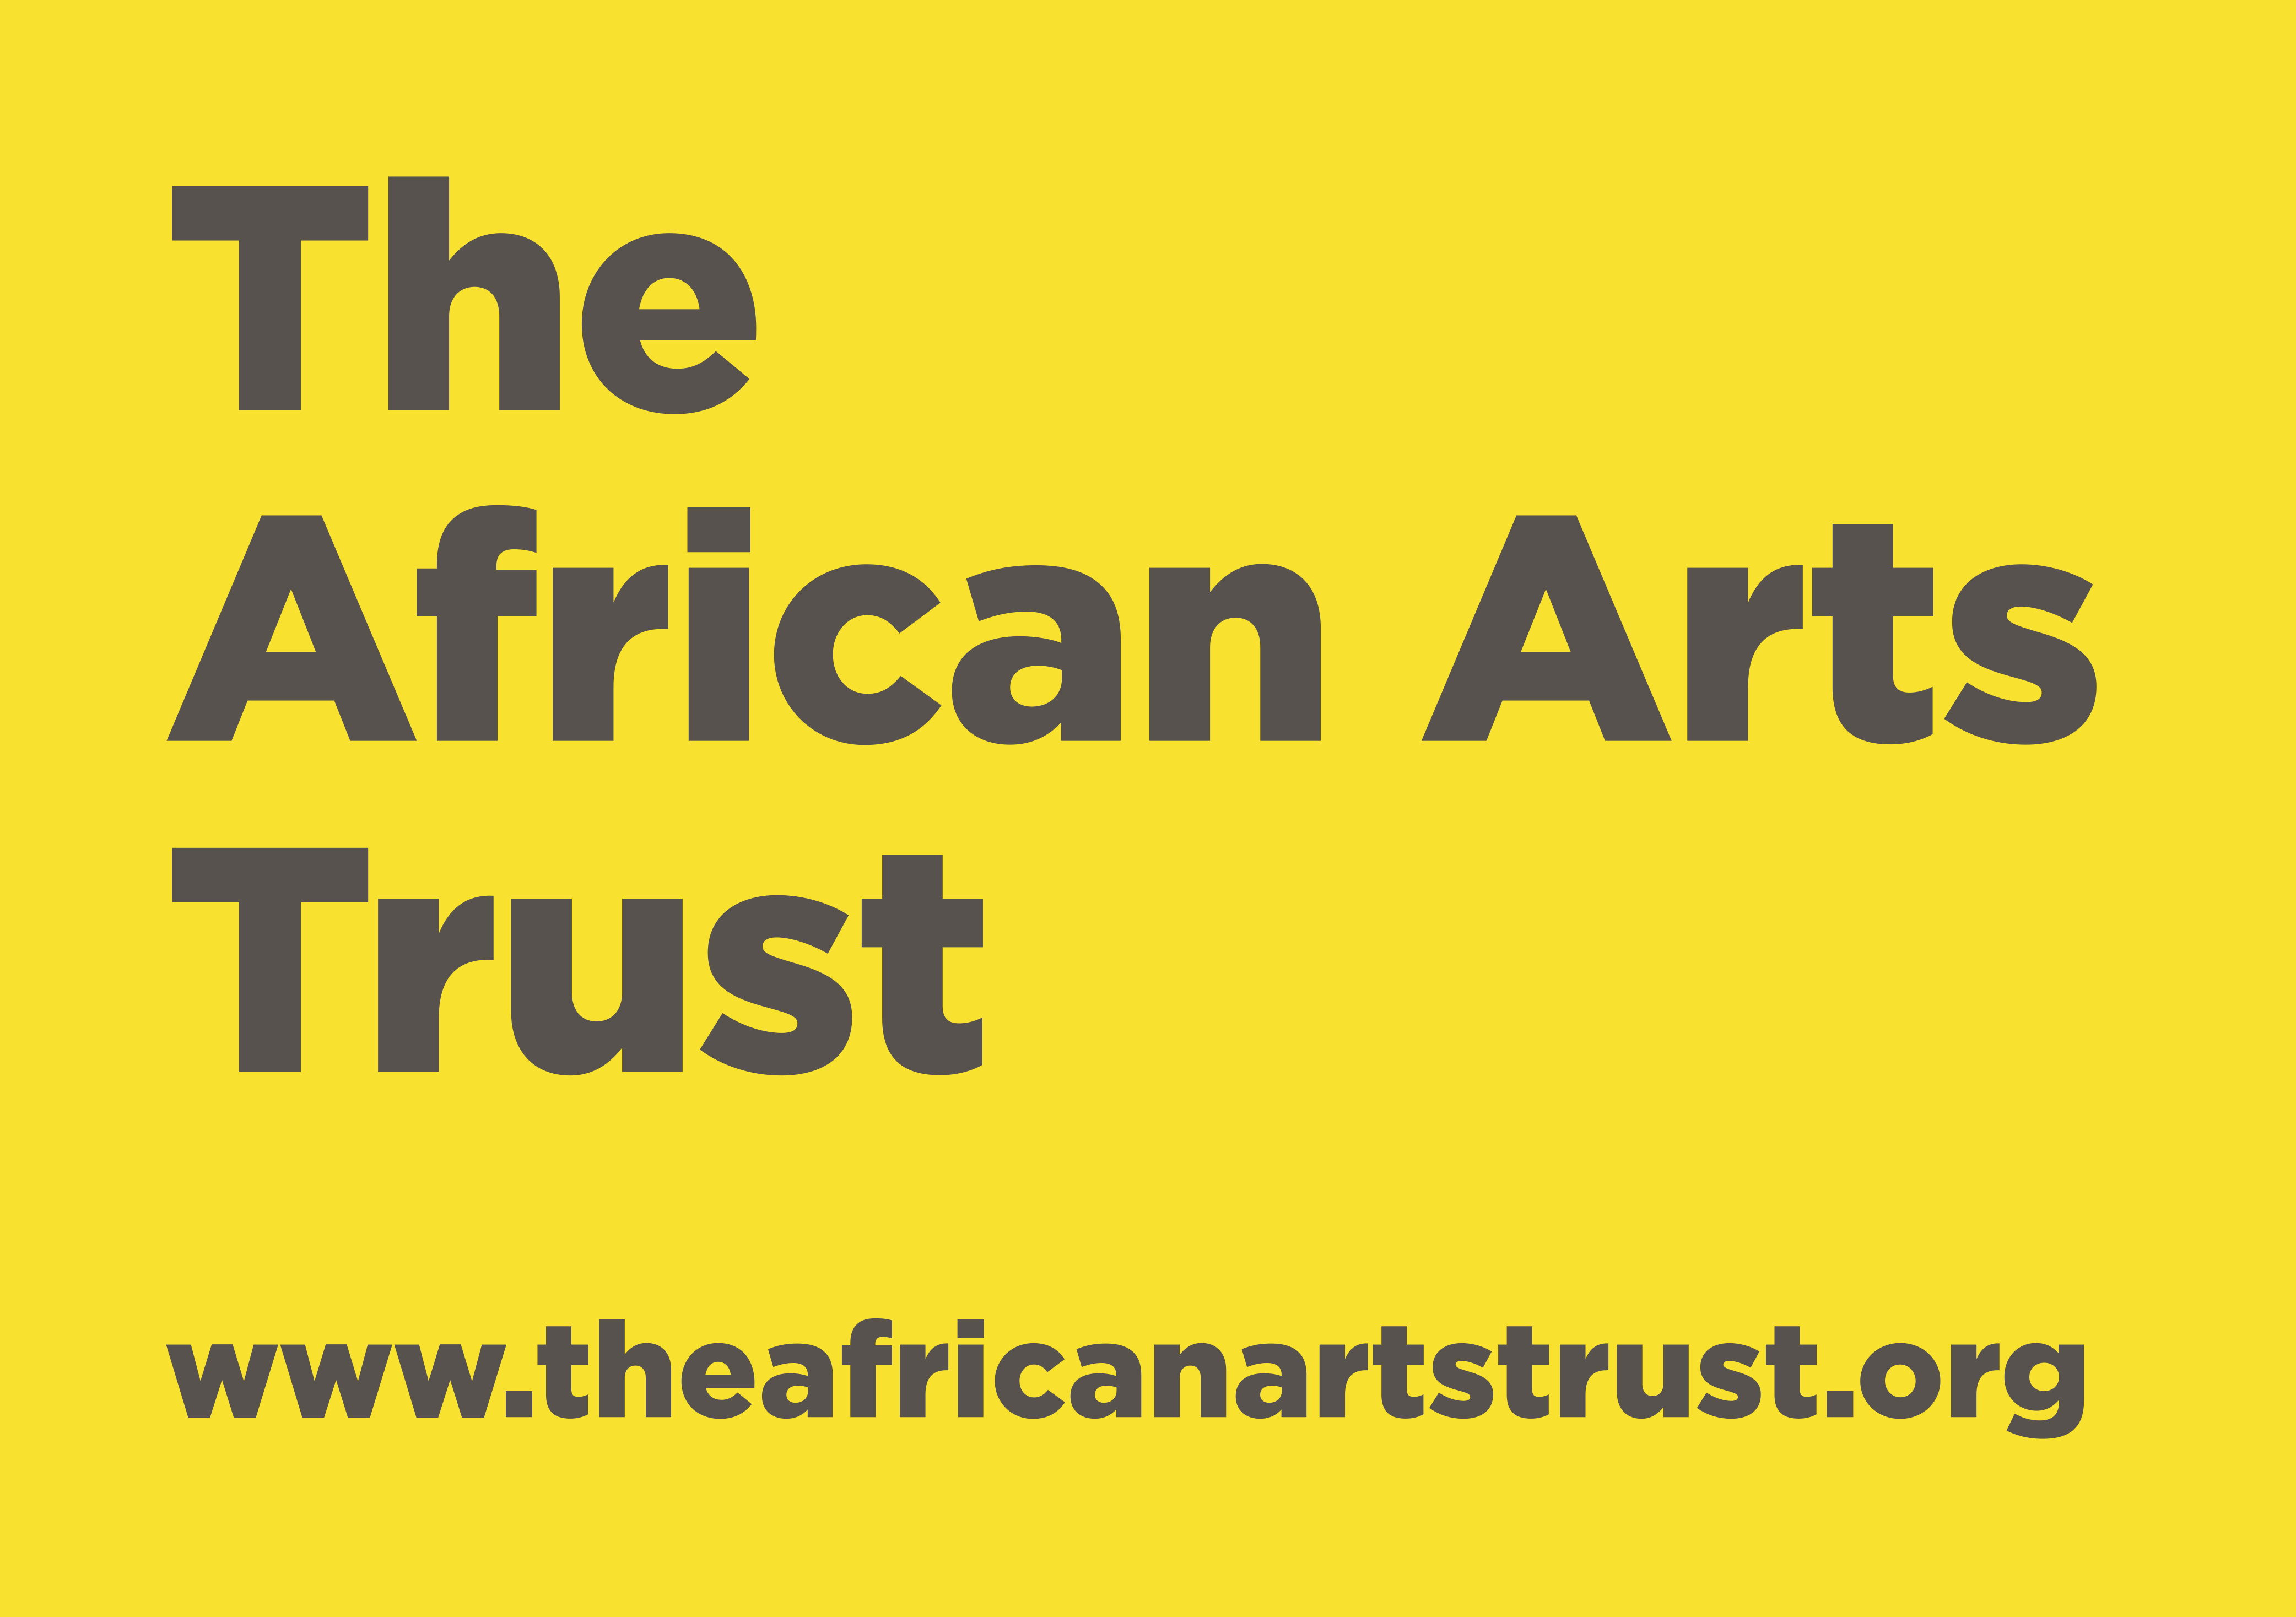 The African Arts Trust